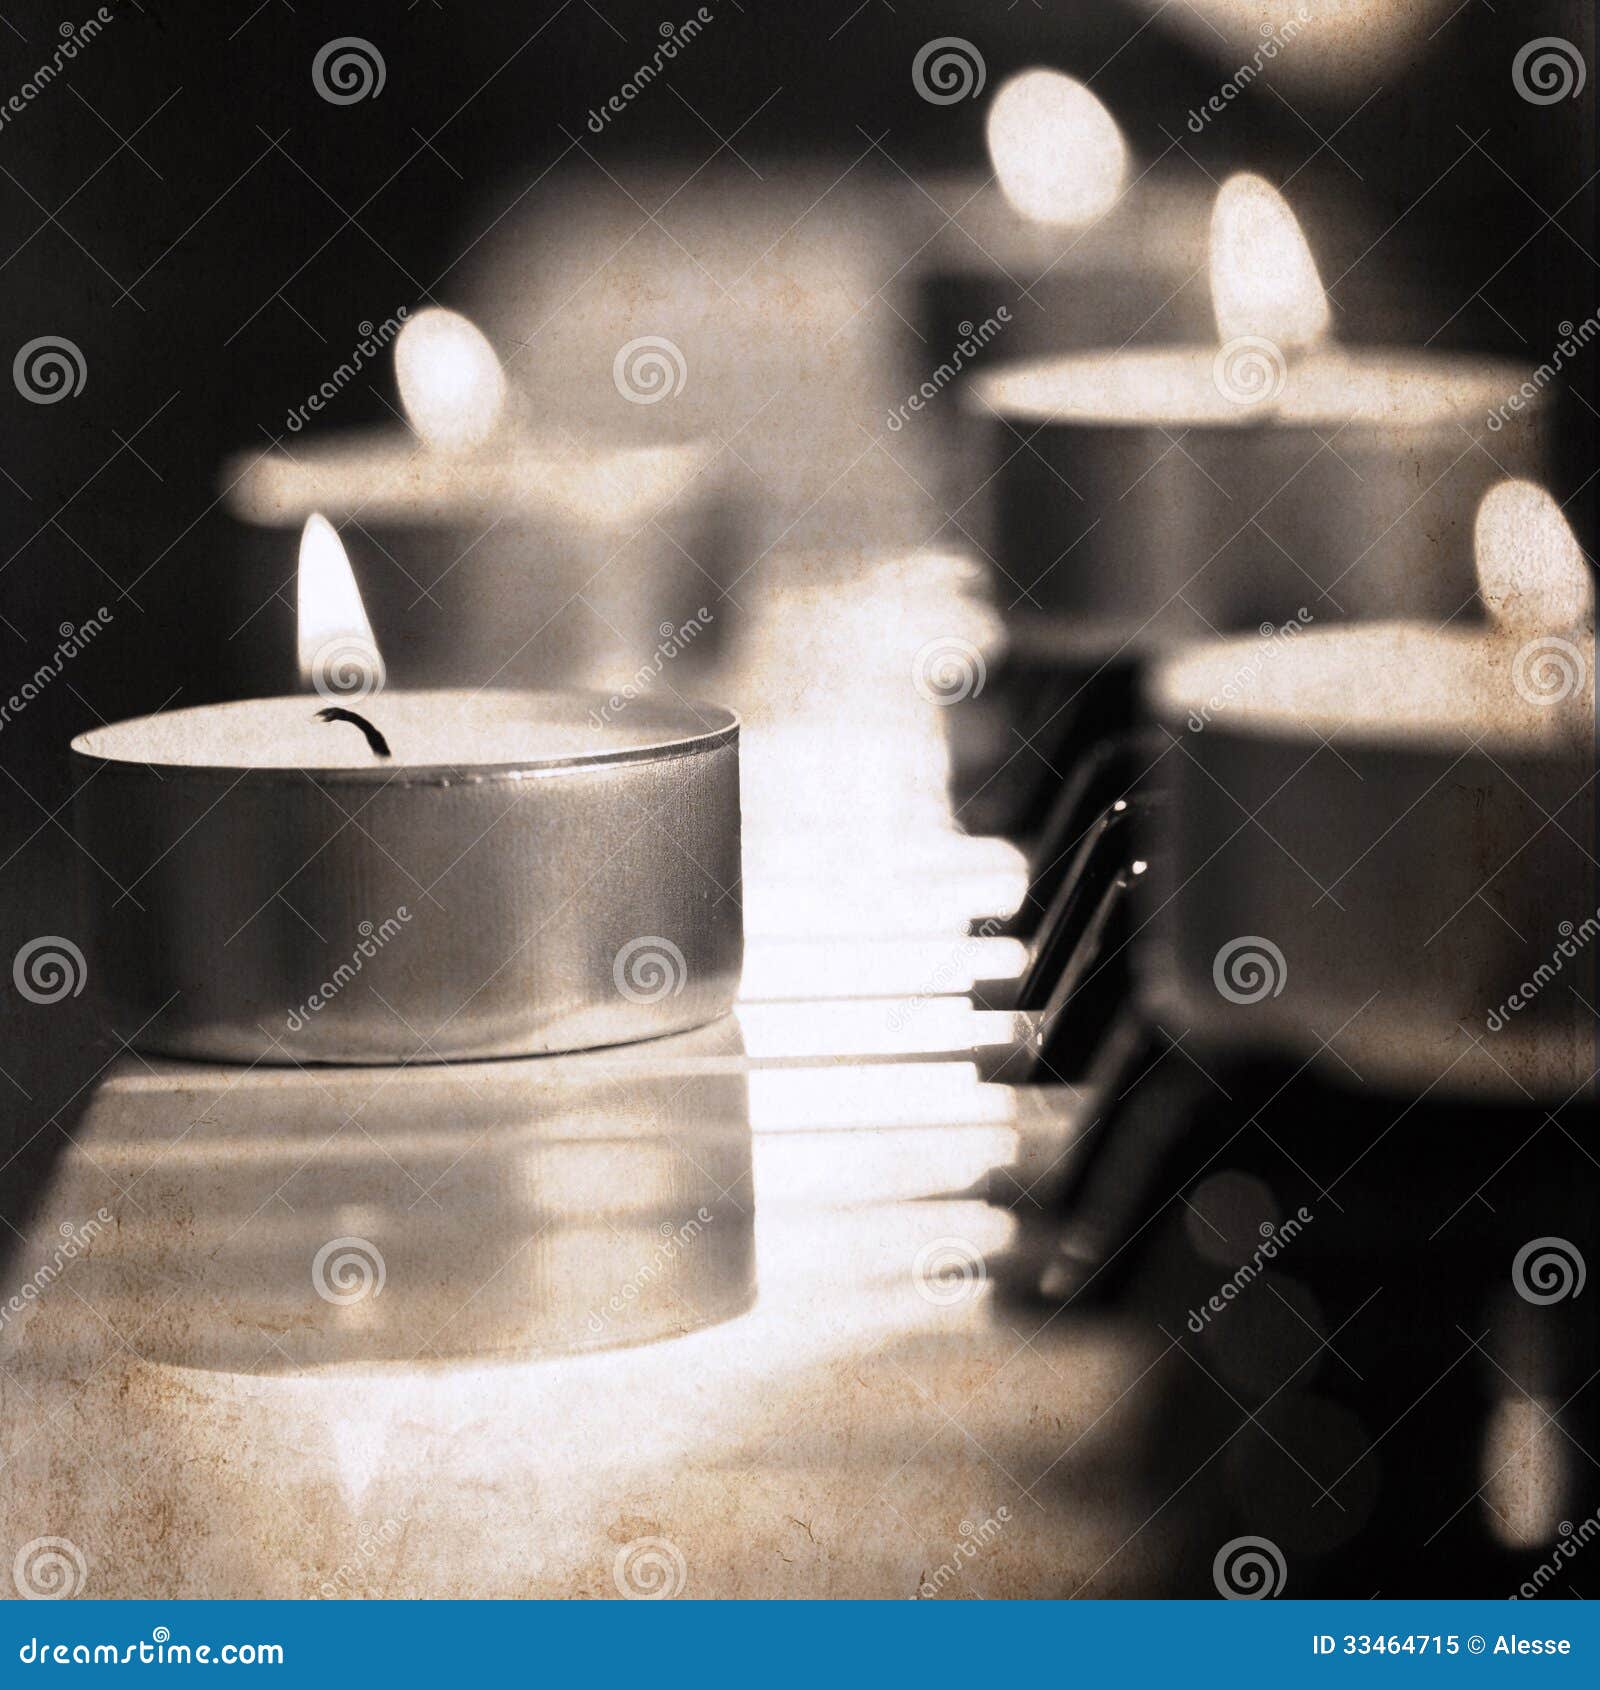 Artwork in Grunge Style, Candles Stock Image - Image of classic, dark ...